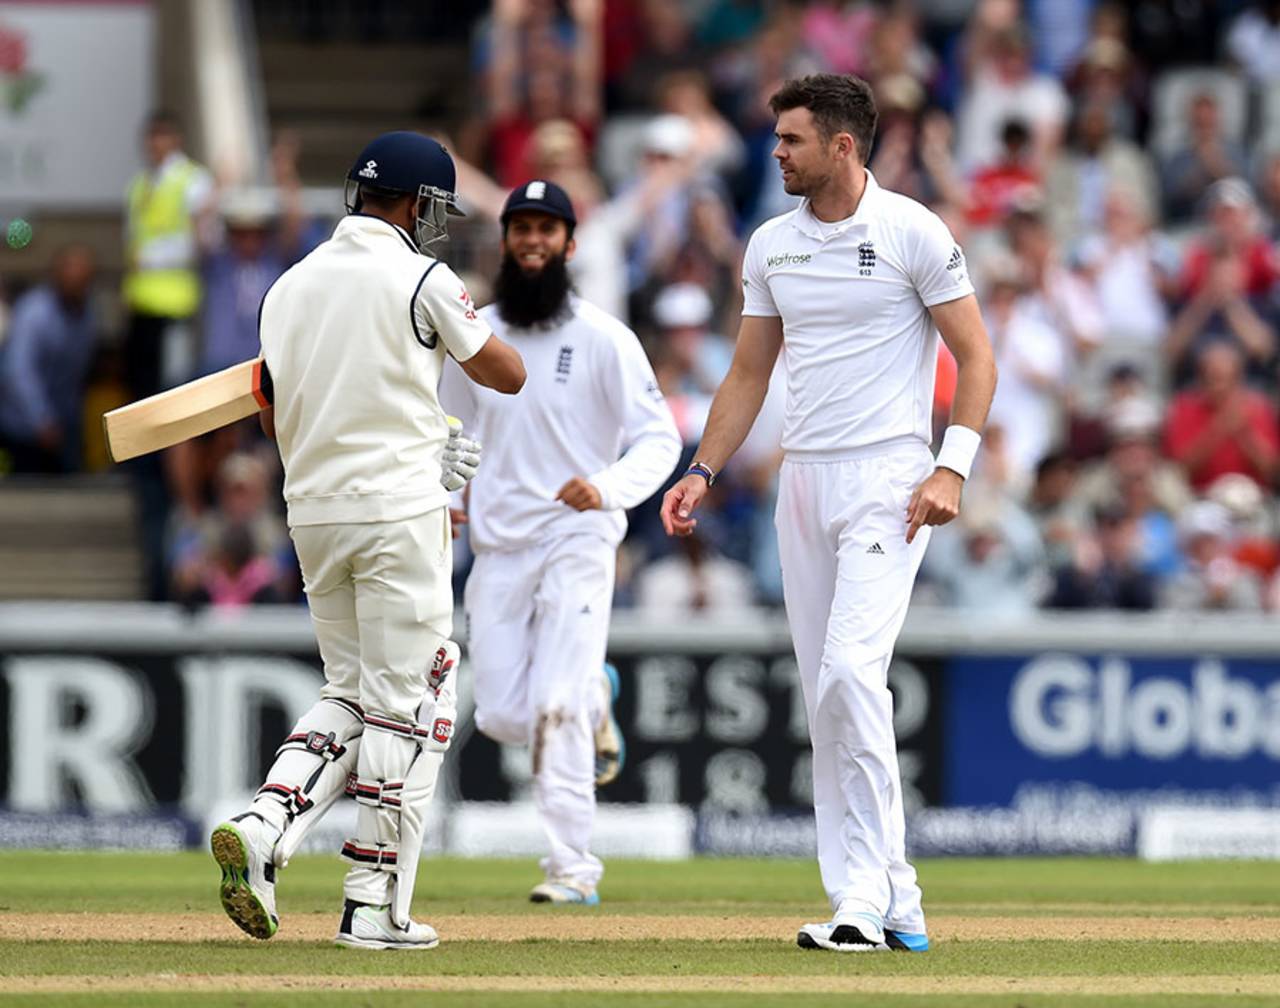 James Anderson: I've definitely been different since that incident. And it probably affected me during the World Cup."&nbsp;&nbsp;&bull;&nbsp;&nbsp;Getty Images